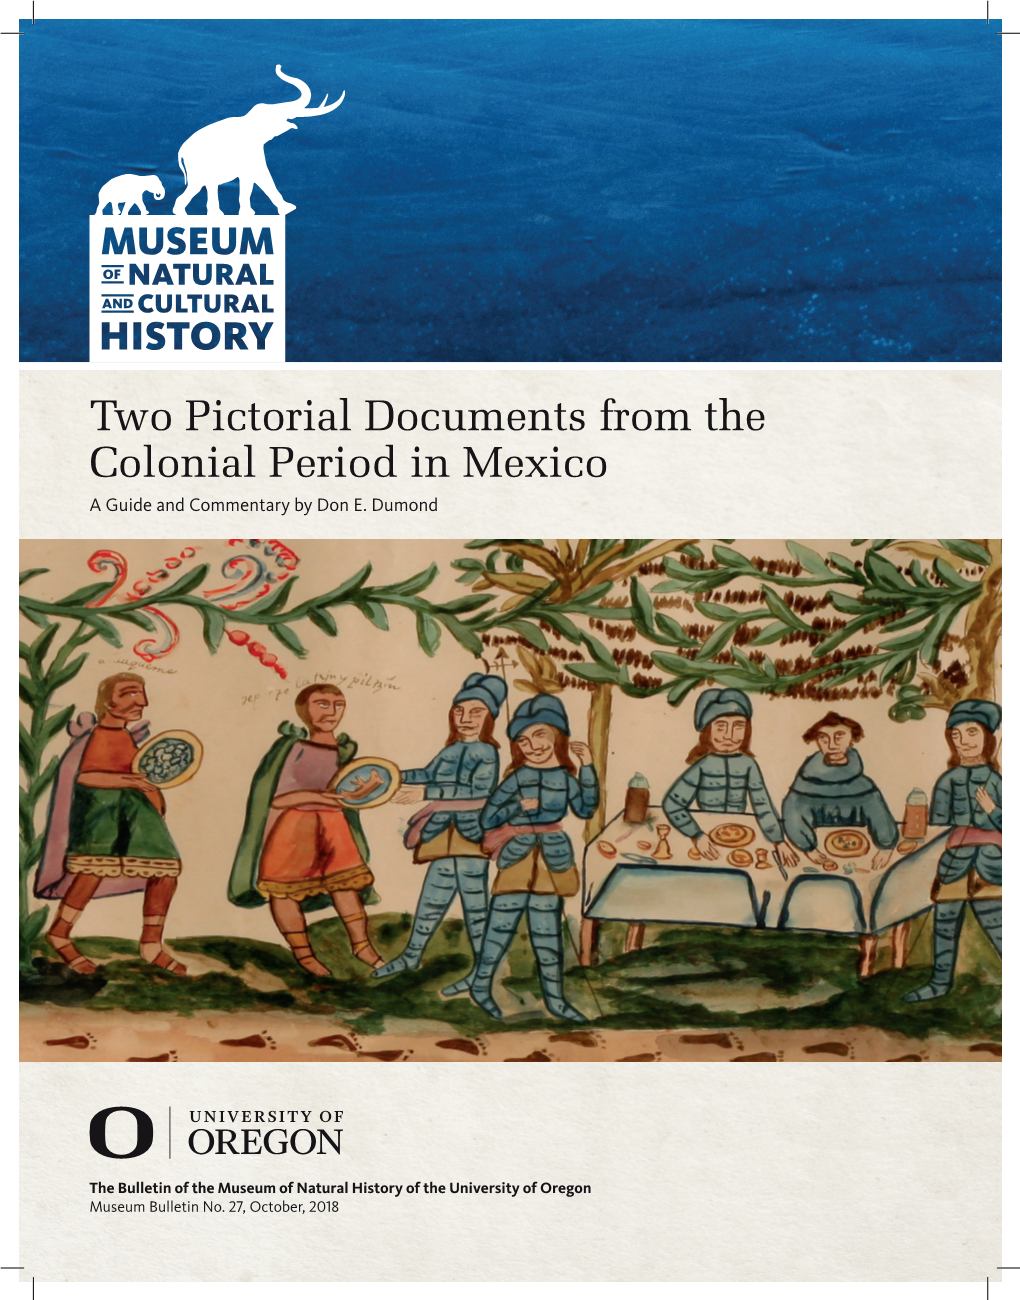 Two Pictorial Documents from the Colonial Period in Mexico a Guide and Commentary by Don E